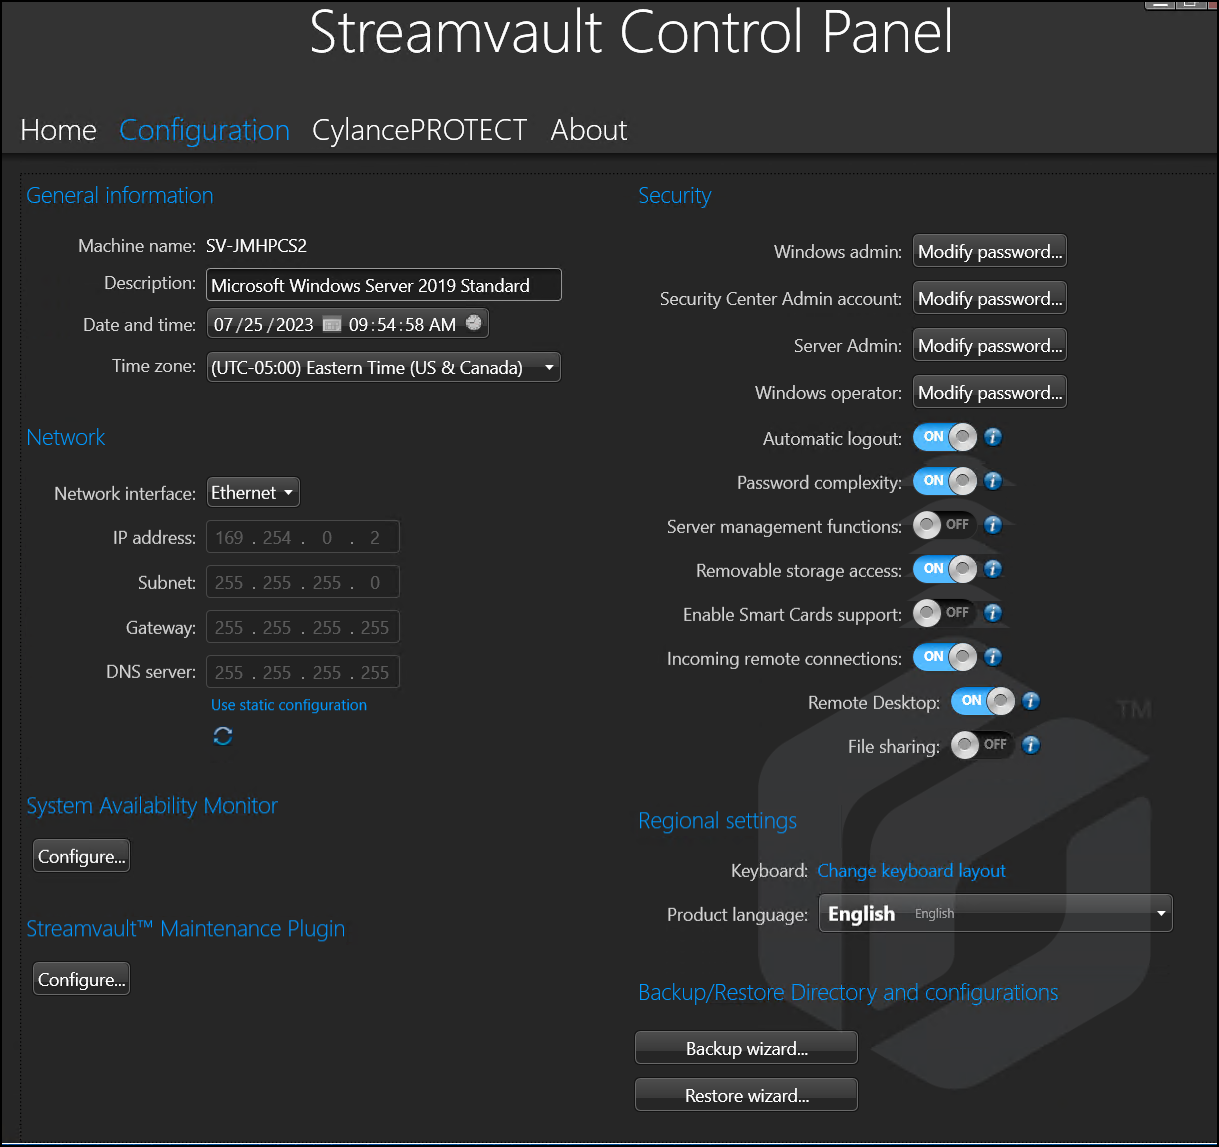 Streamvault Control Panel, showing the features of the Configuration page.